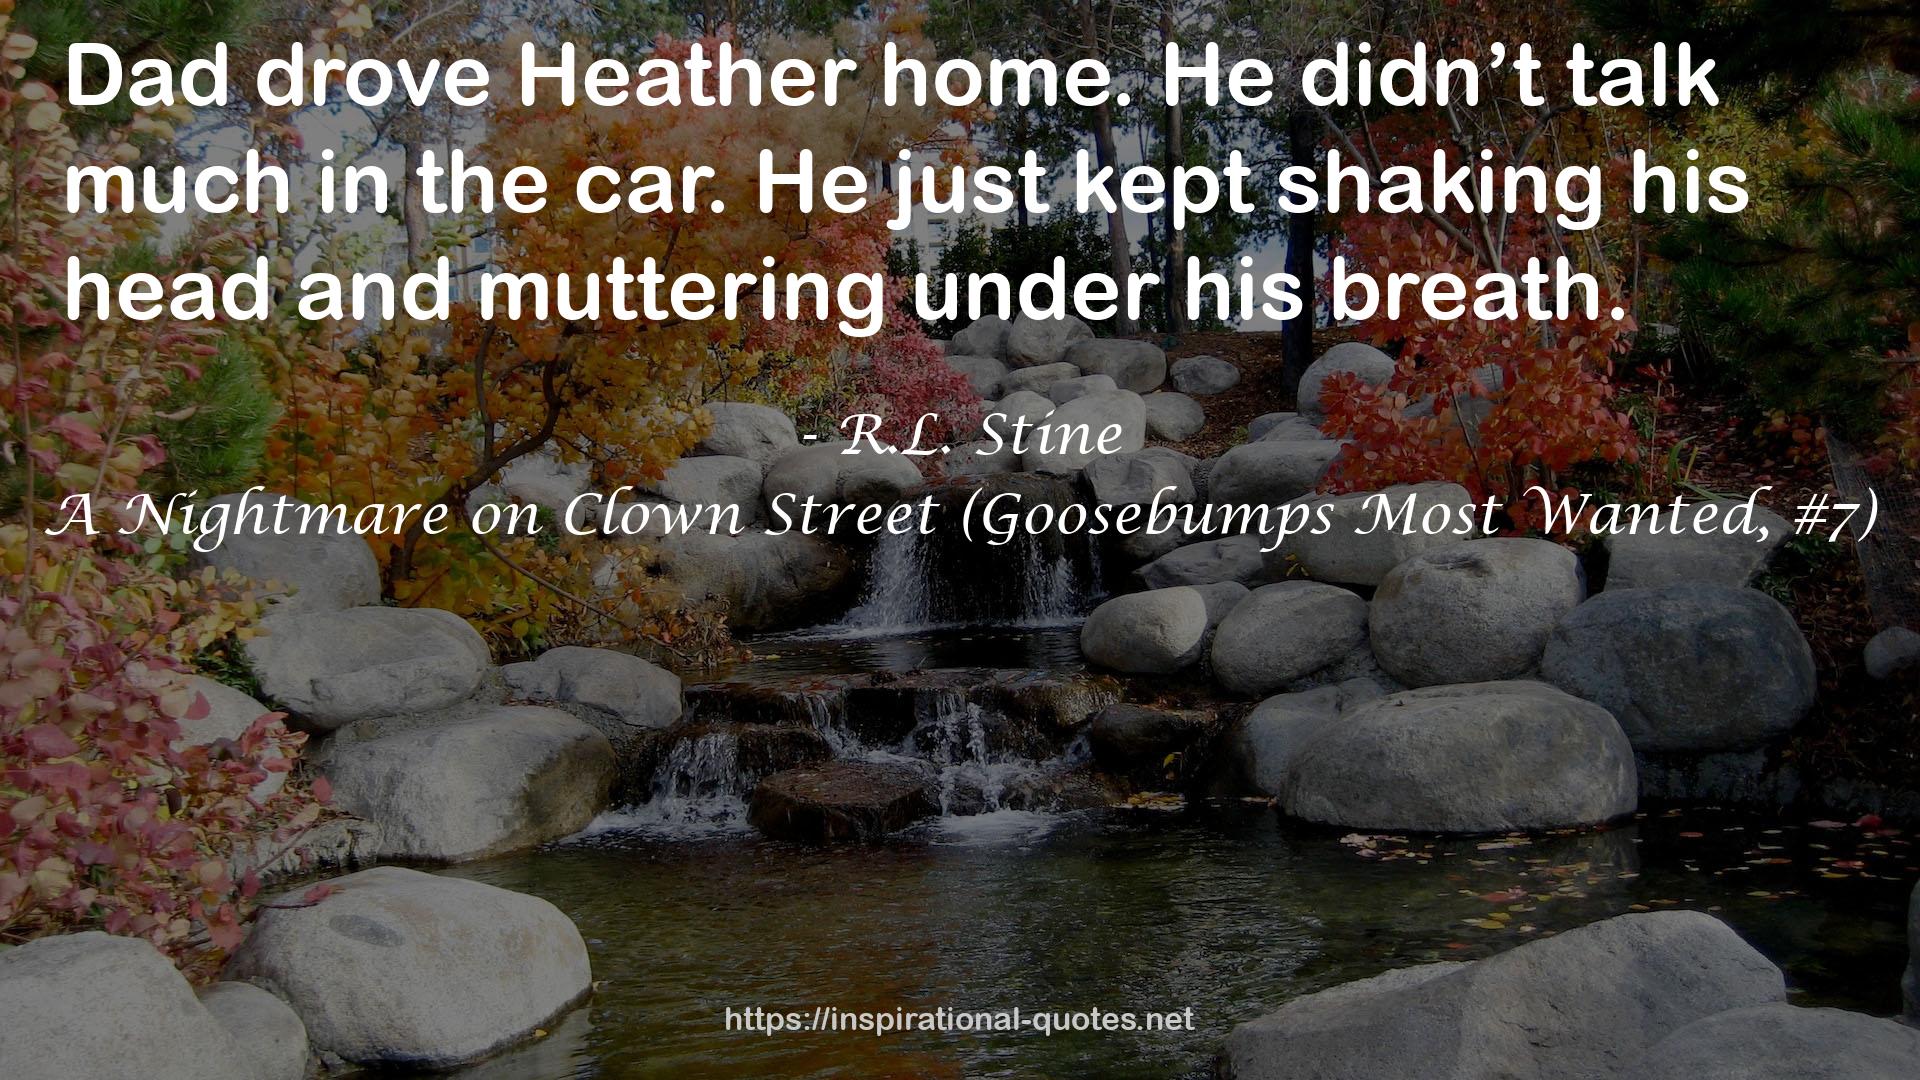 A Nightmare on Clown Street (Goosebumps Most Wanted, #7) QUOTES